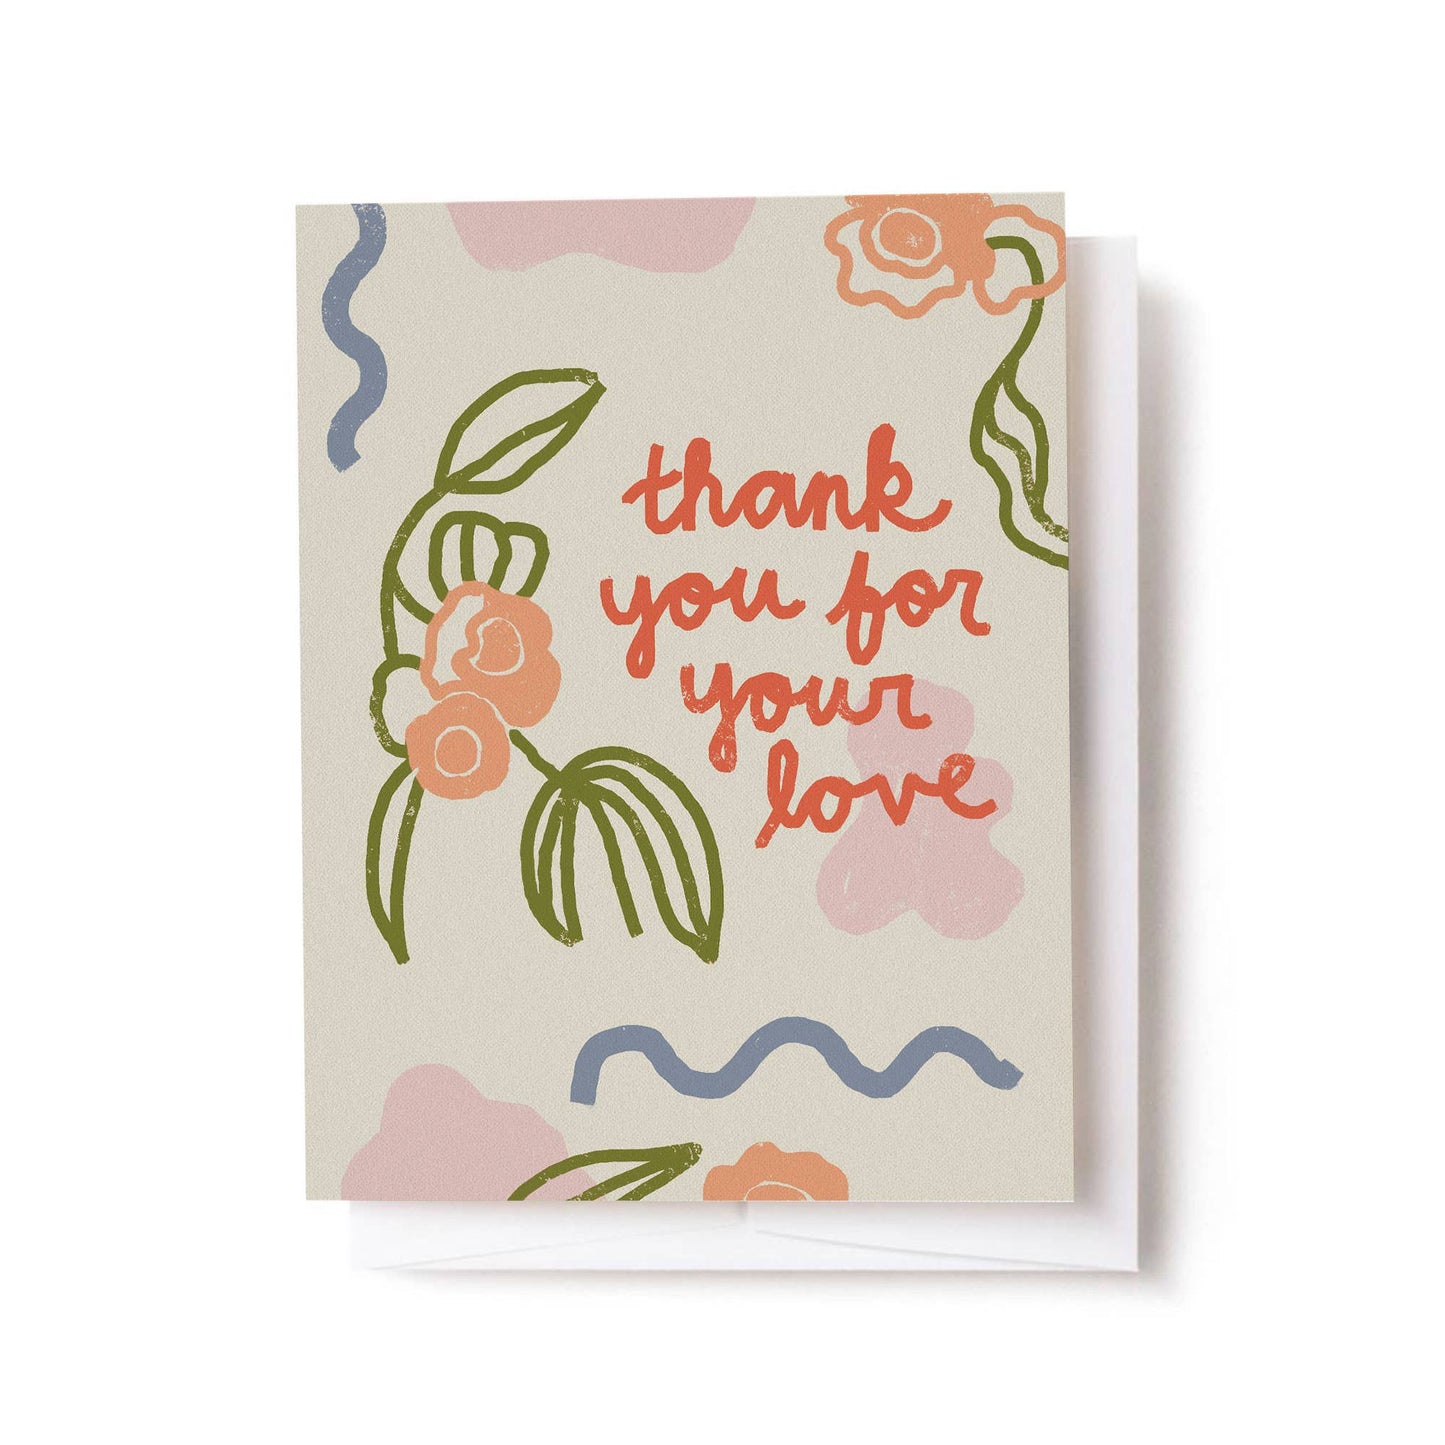 Greeting Card - Thank You for Your Love